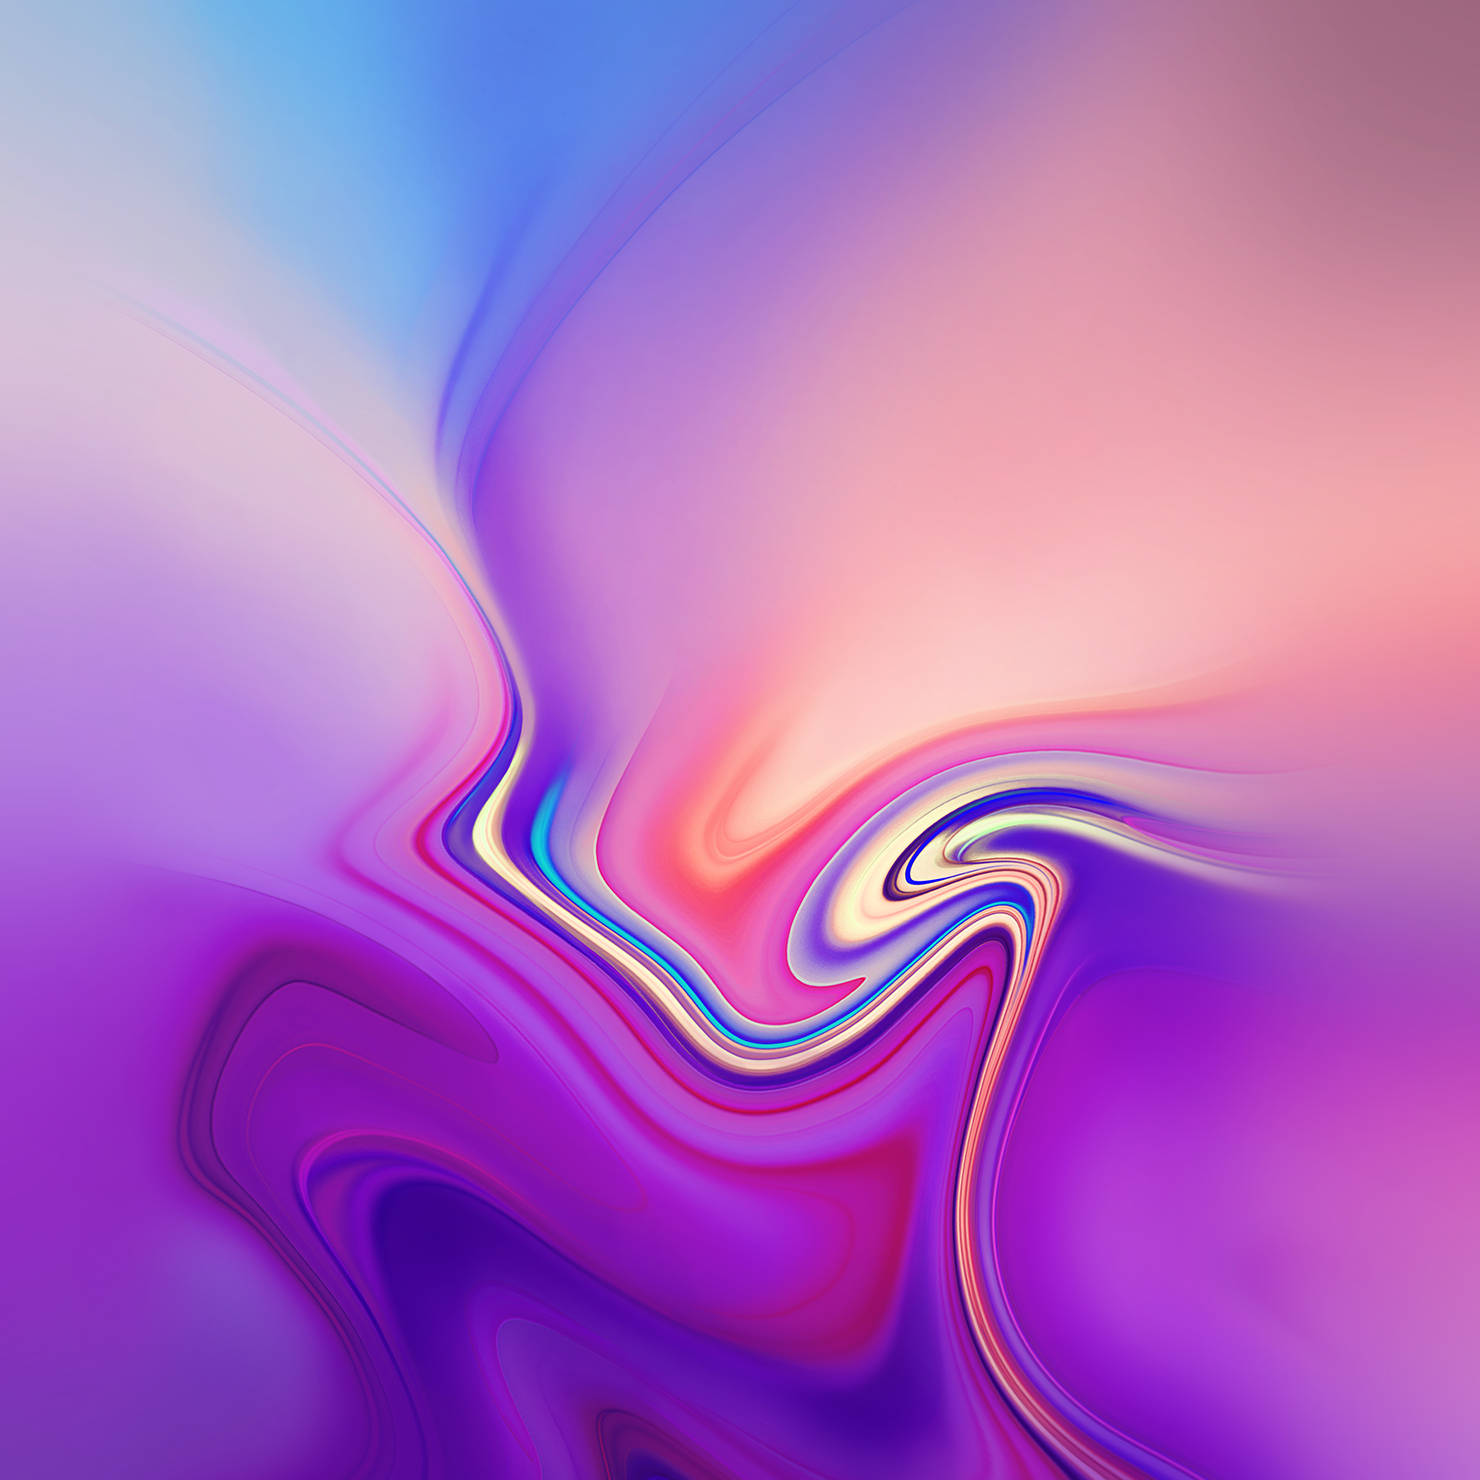 Galaxy S10 Colorful Abstract Wallpaper